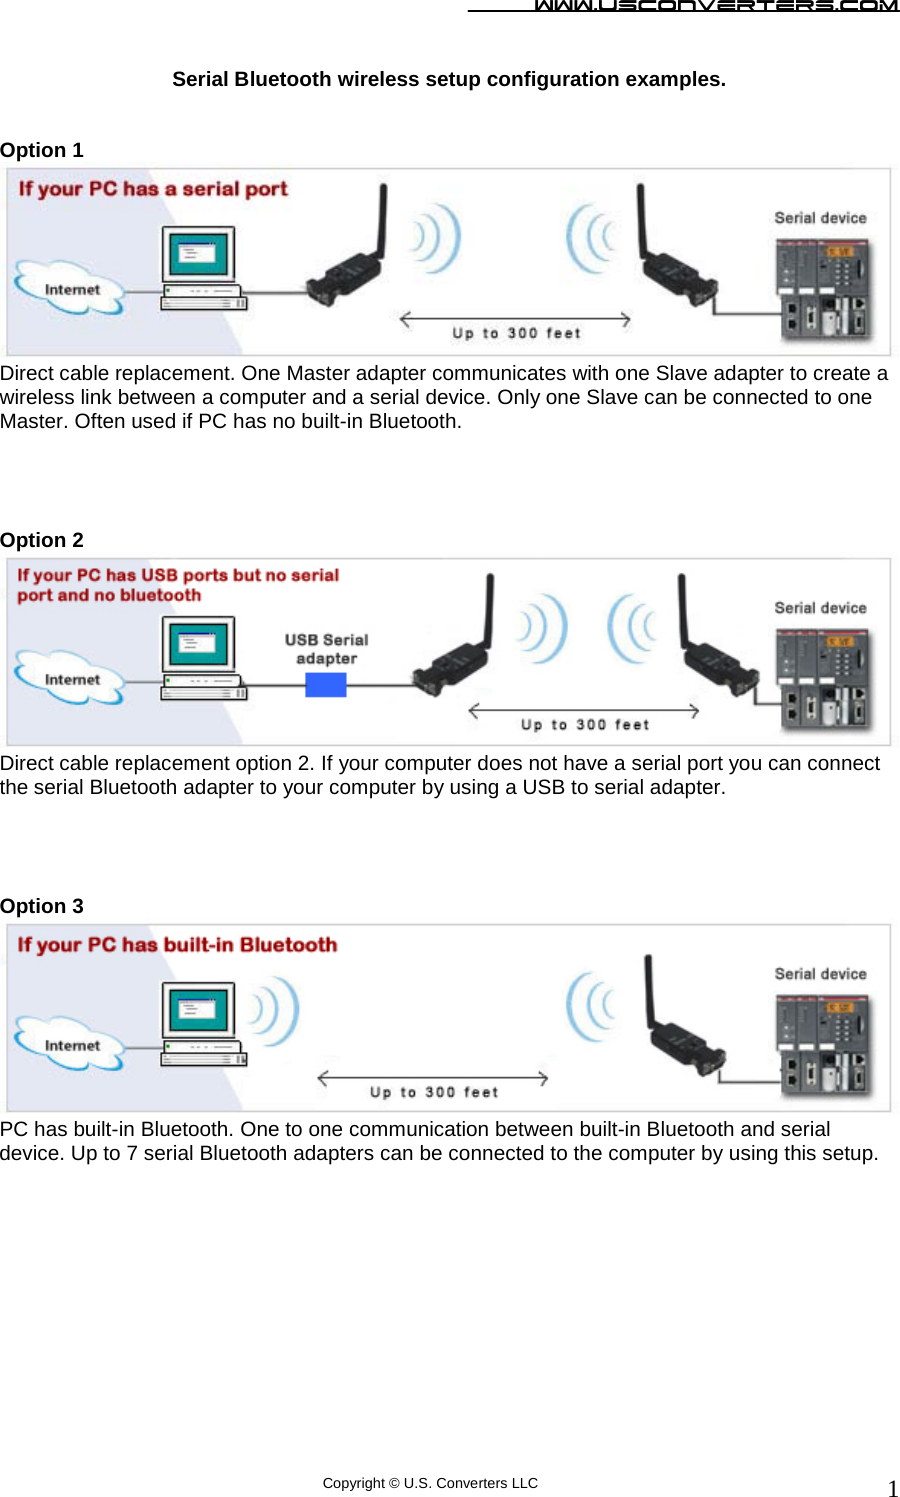 Page 1 of 5 - Serial RF Wireless Setup Configuration Examples Serial-bluetooth-setup-examples